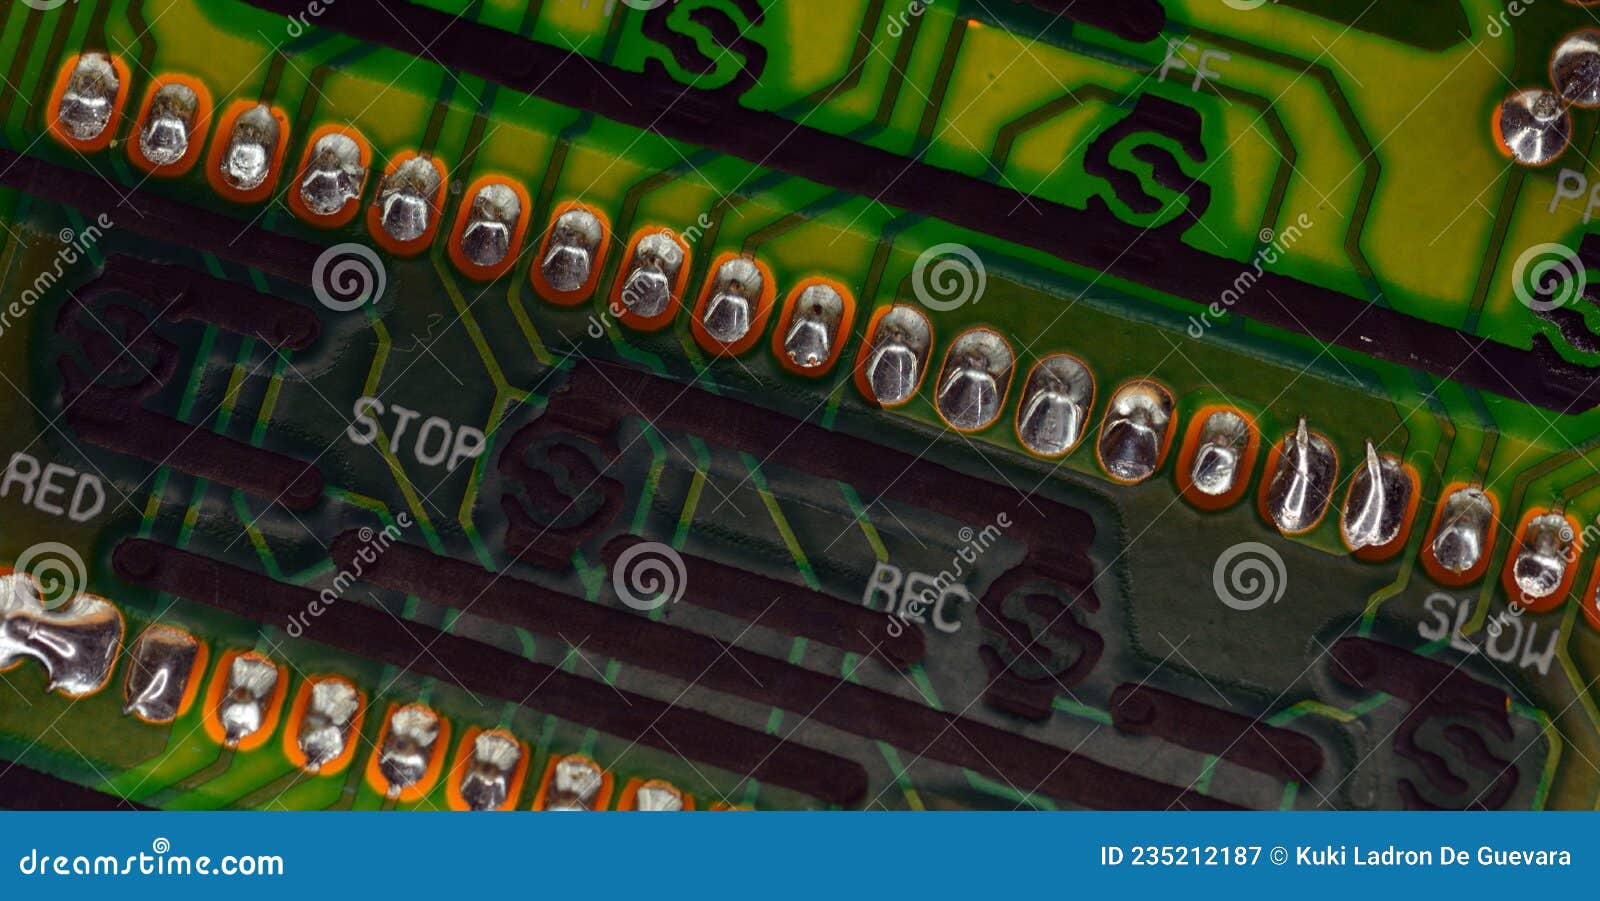 detail of an electronic board